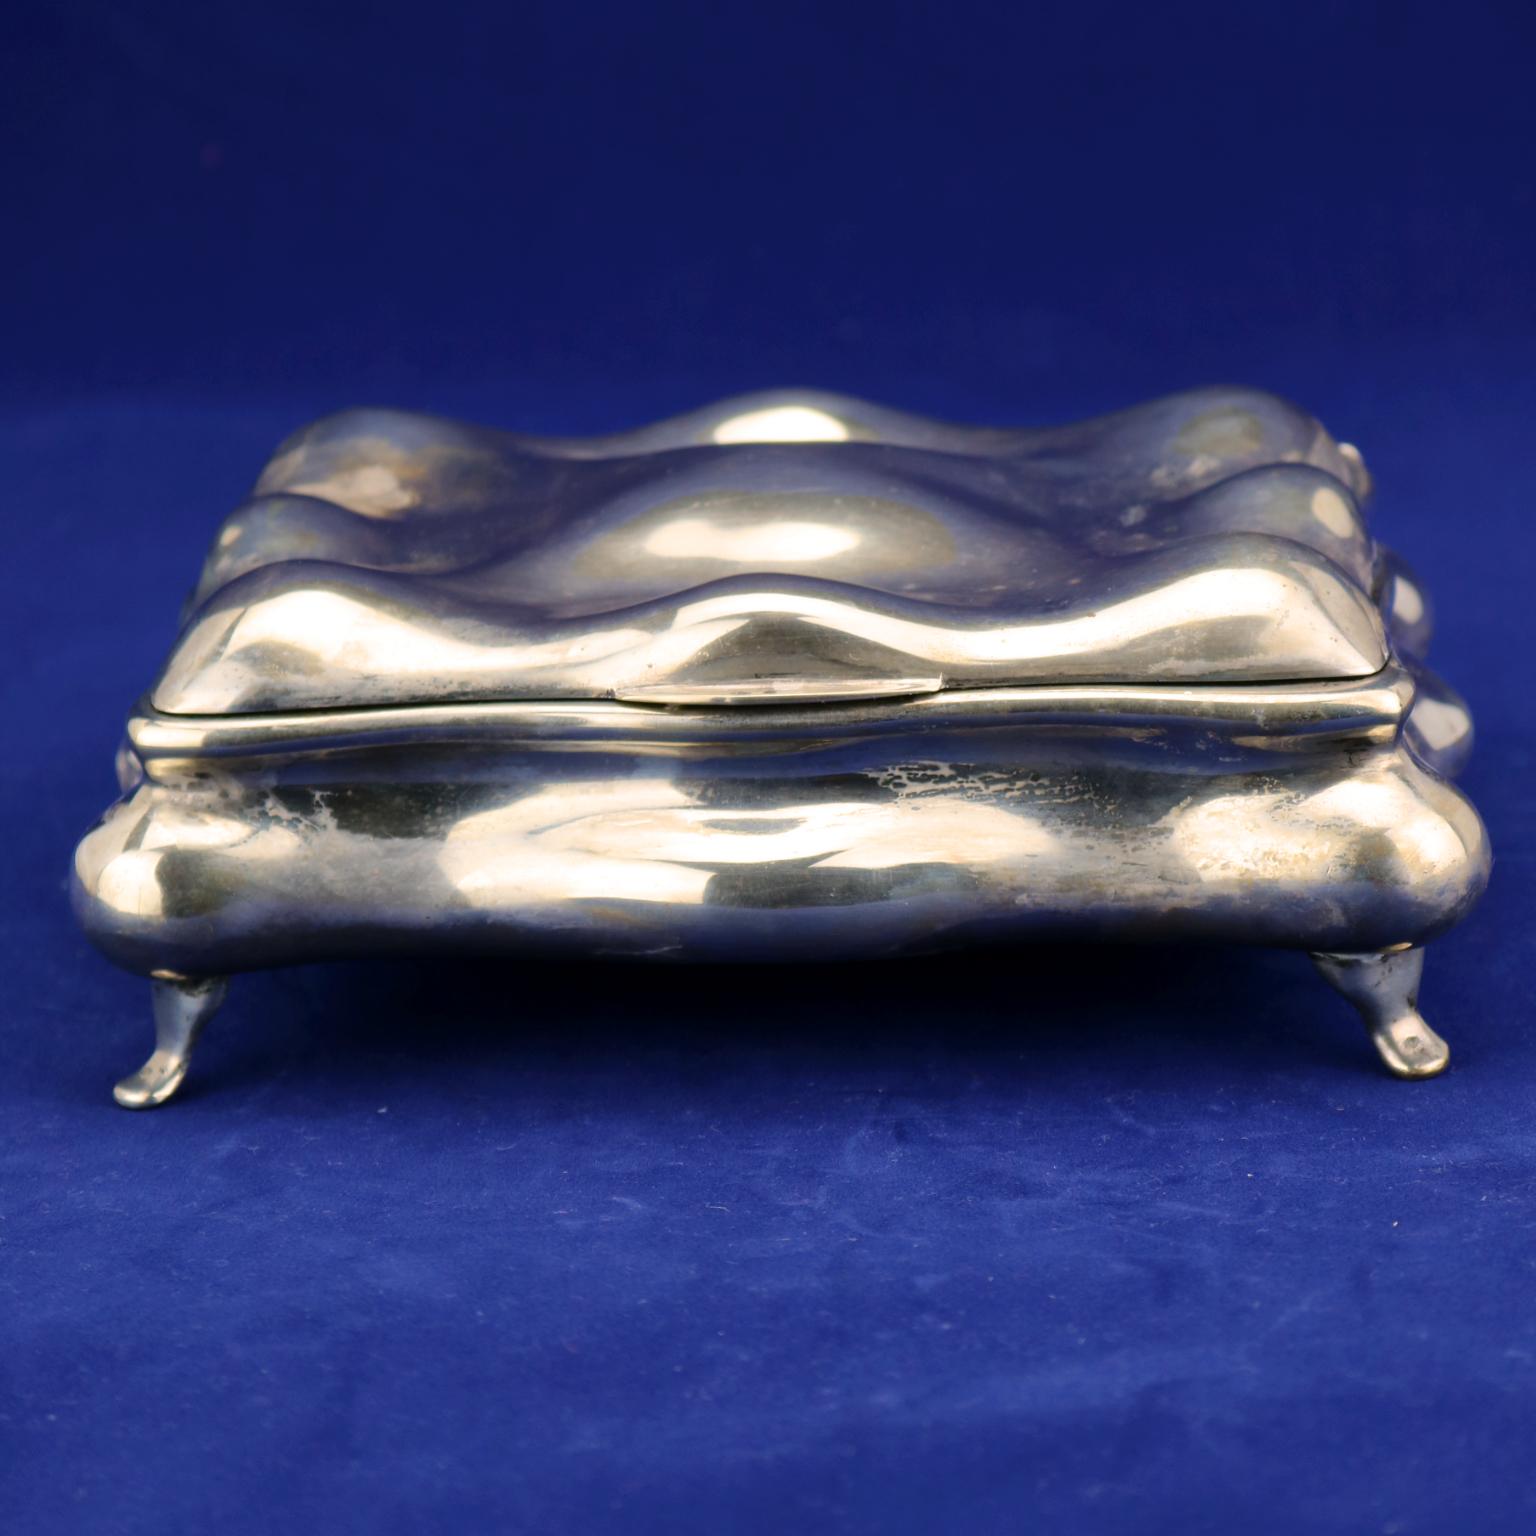 Austro Hungarian silver playing card or cigarette box, circa 1890. Fully hallmarked by head of Diana No 3 (800/1000) and head of dog No 3 (800/1000) on closing of the box.

Weight 412 grams (13,246 troy ounce).